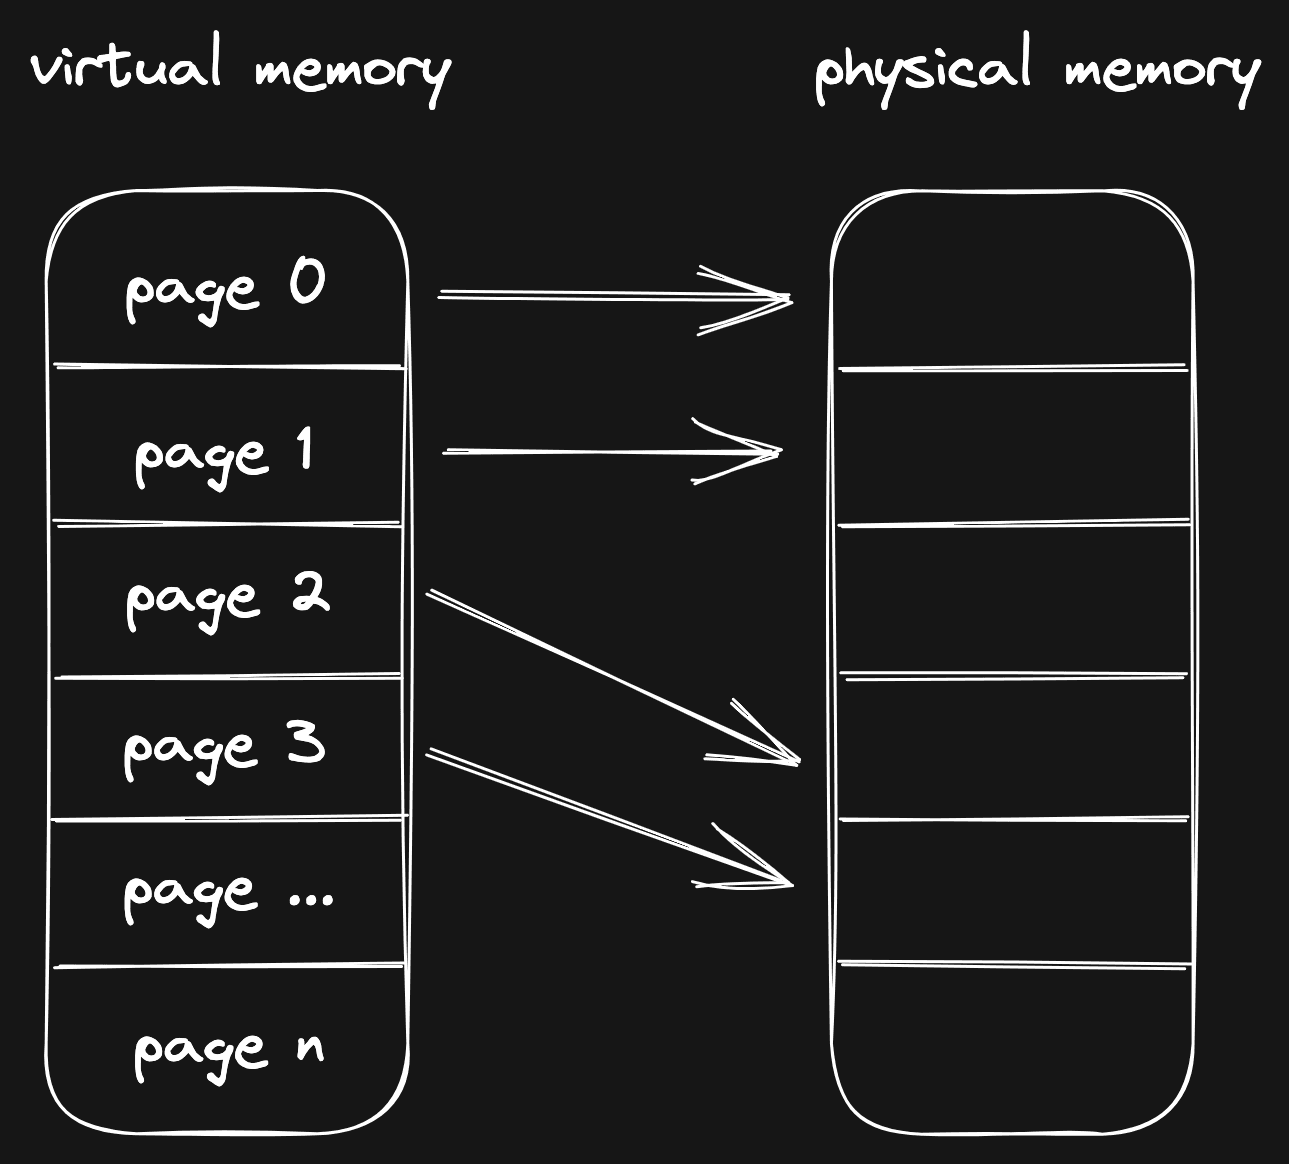 Virtual memory mapping to physical memory